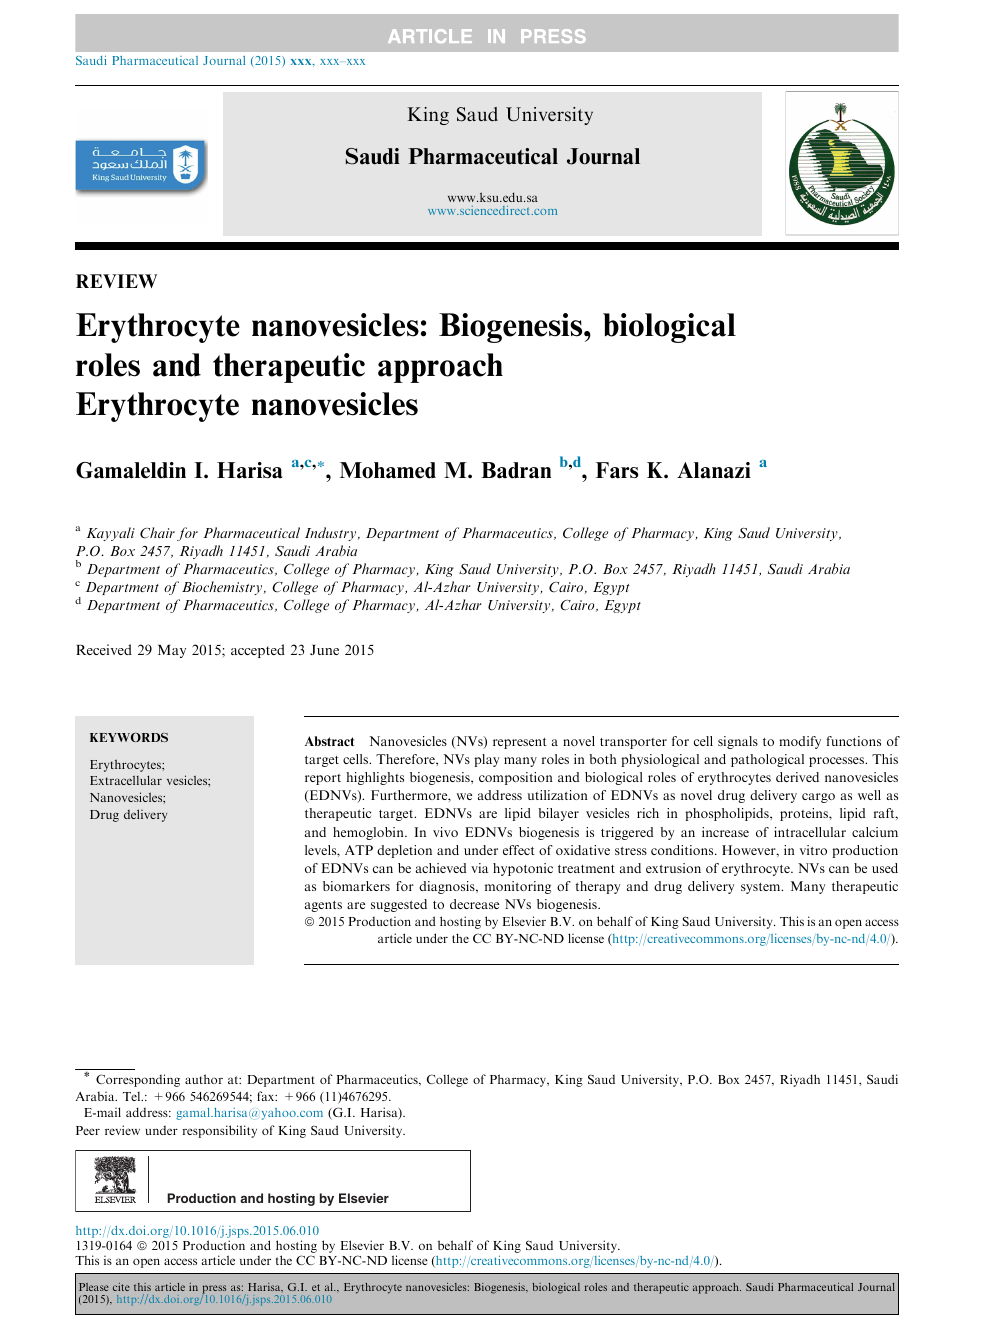 Erythrocyte Nanovesicles Biogenesis Biological Roles And Therapeutic Approach Topic Of Research Paper In Chemical Sciences Download Scholarly Article Pdf And Read For Free On Cyberleninka Open Science Hub